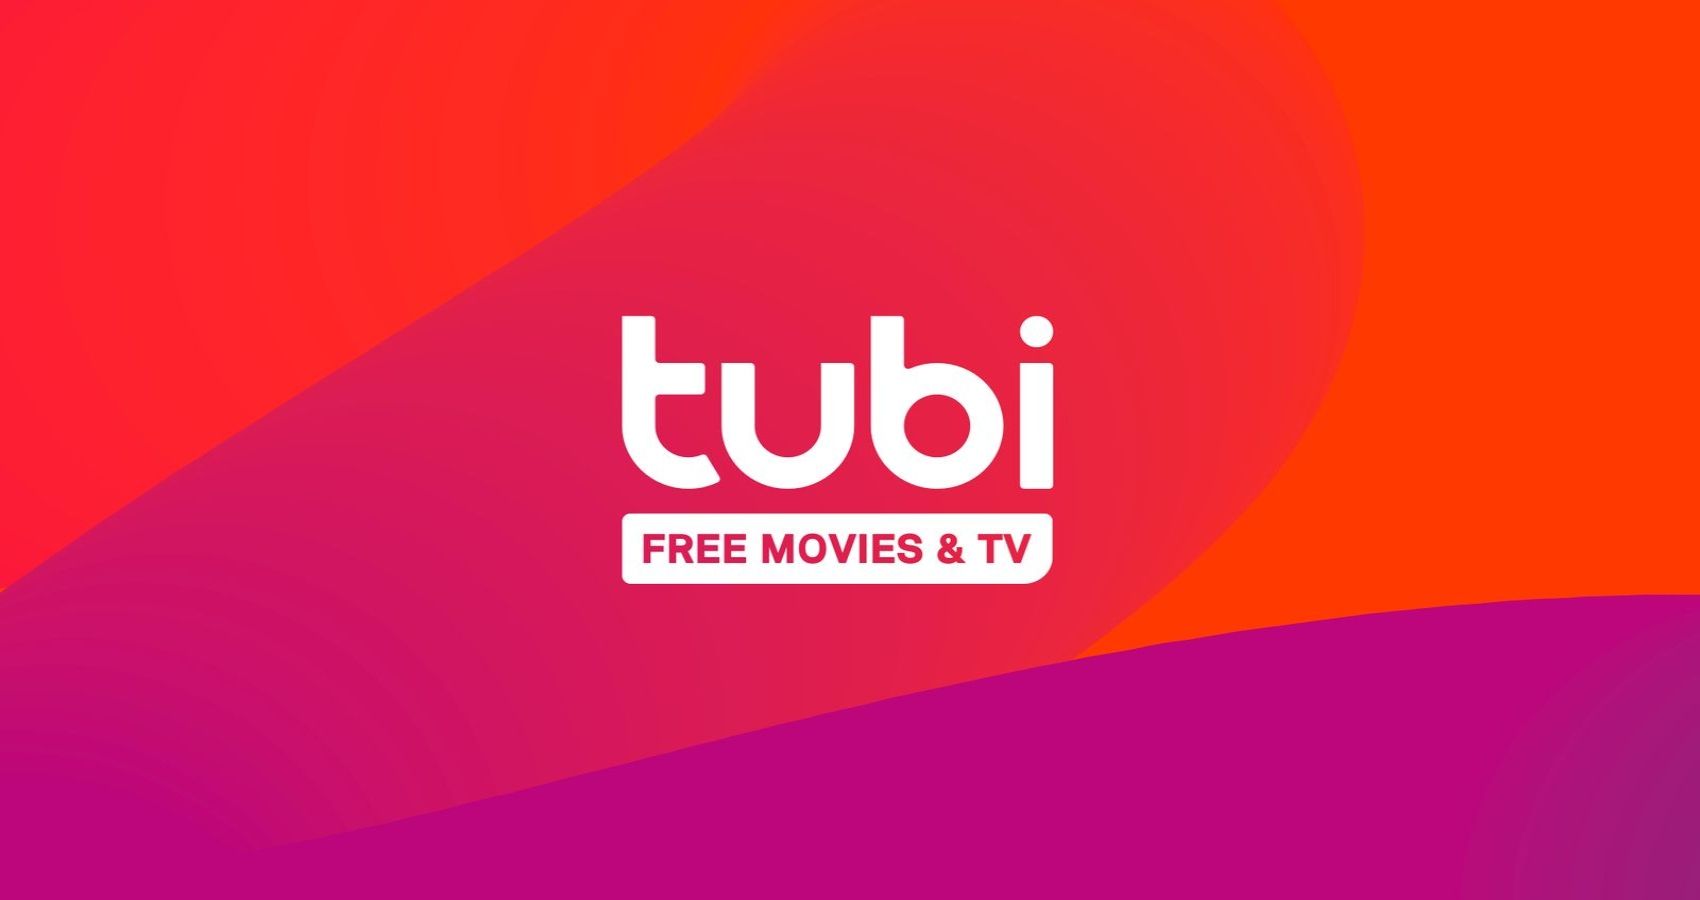 Tubi’s Super Bowl Ad The 'Troublemaker of the Streaming World' Brought